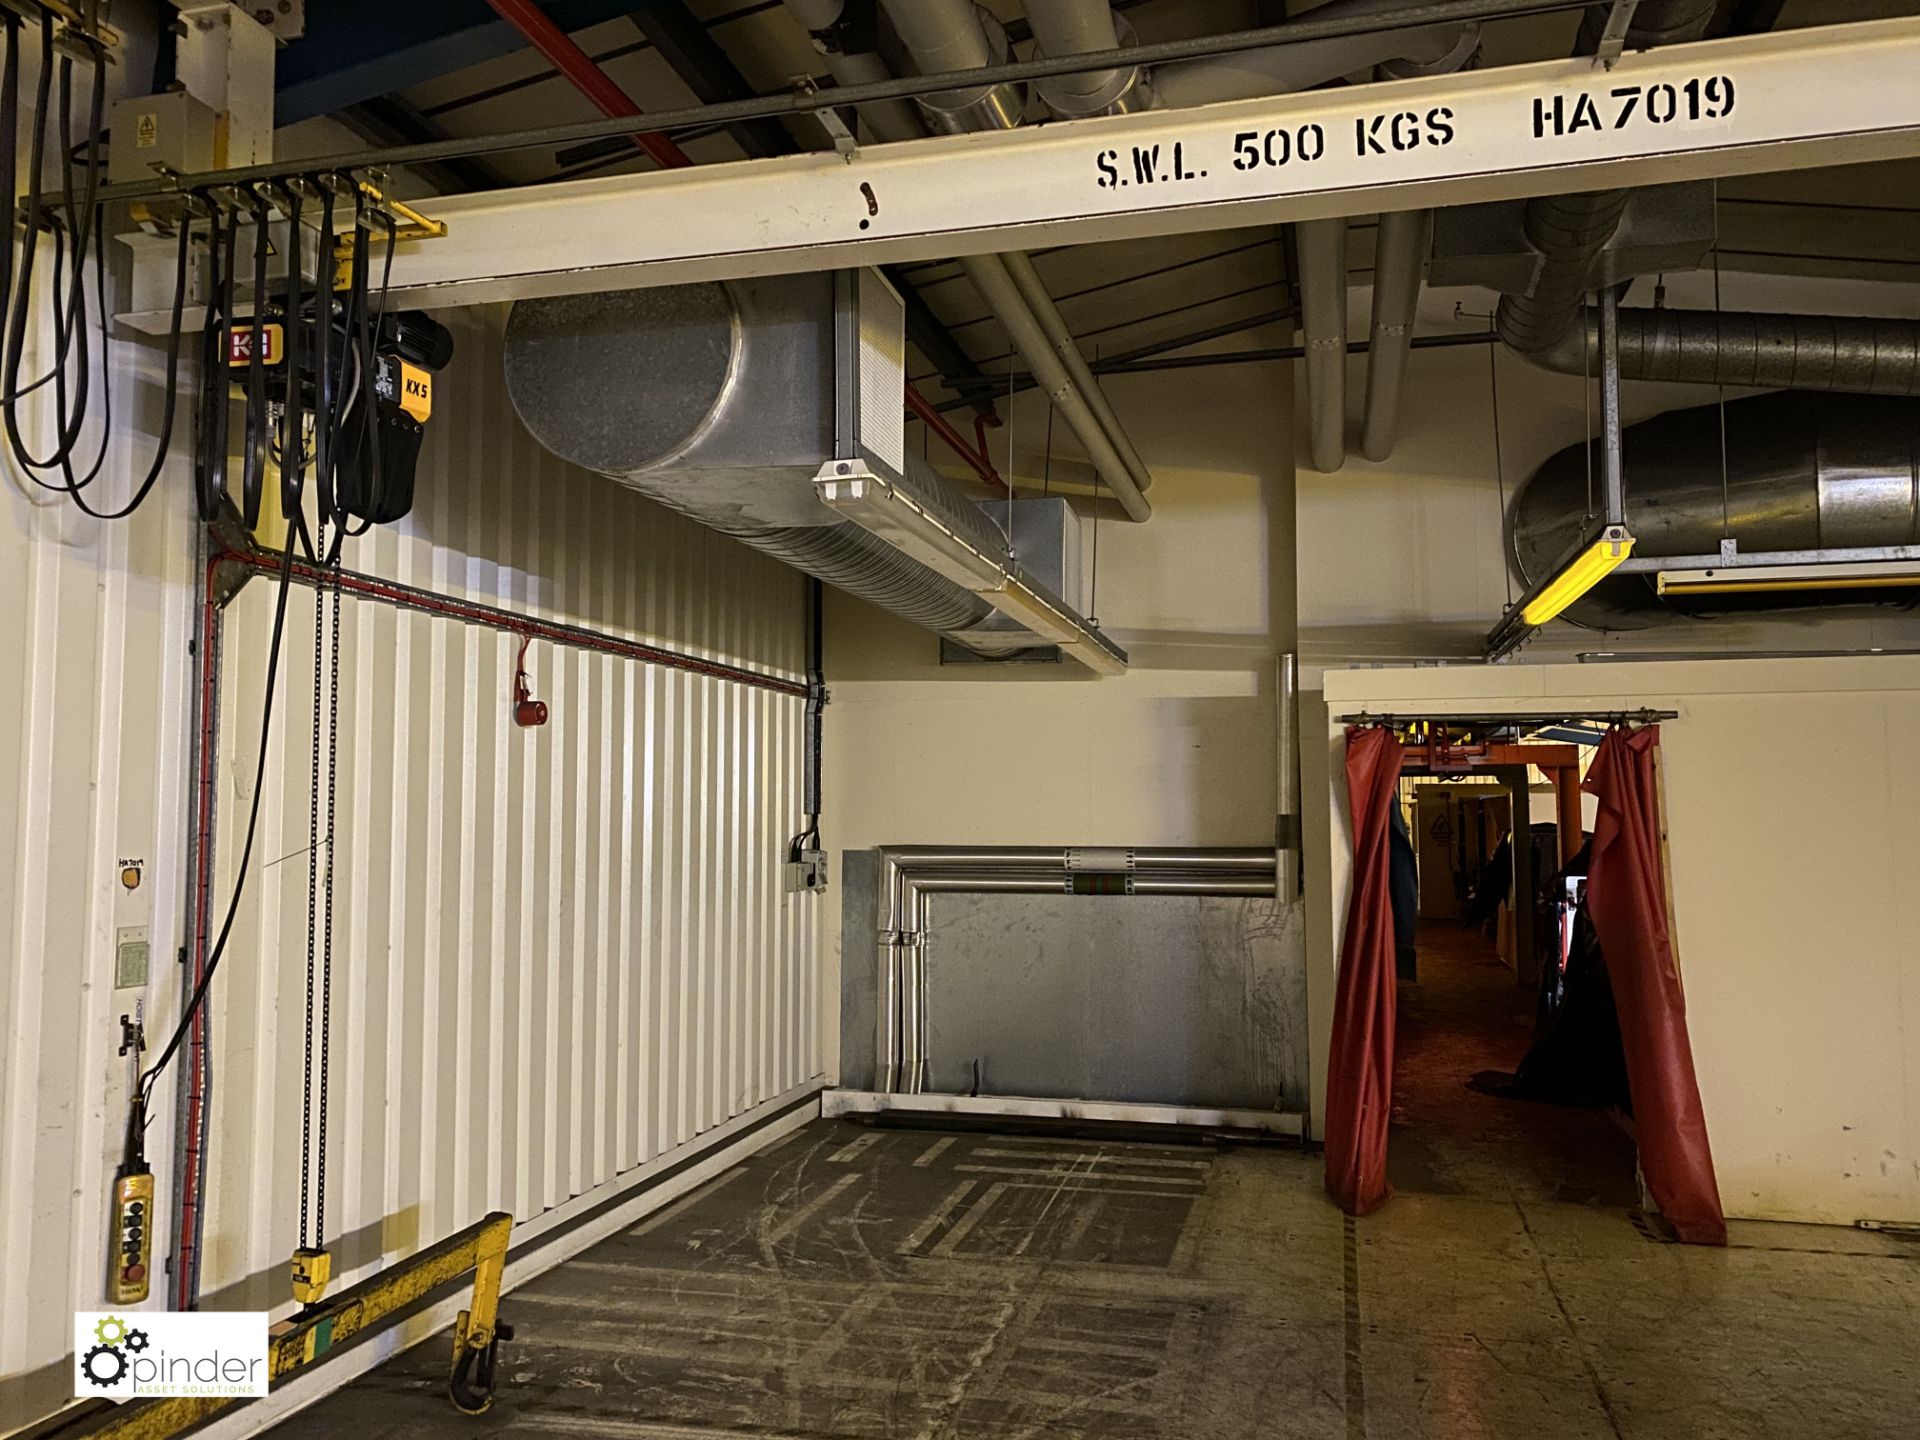 Suspended Lifting Runway, 8200mm long, 500kg swl, - Image 2 of 5